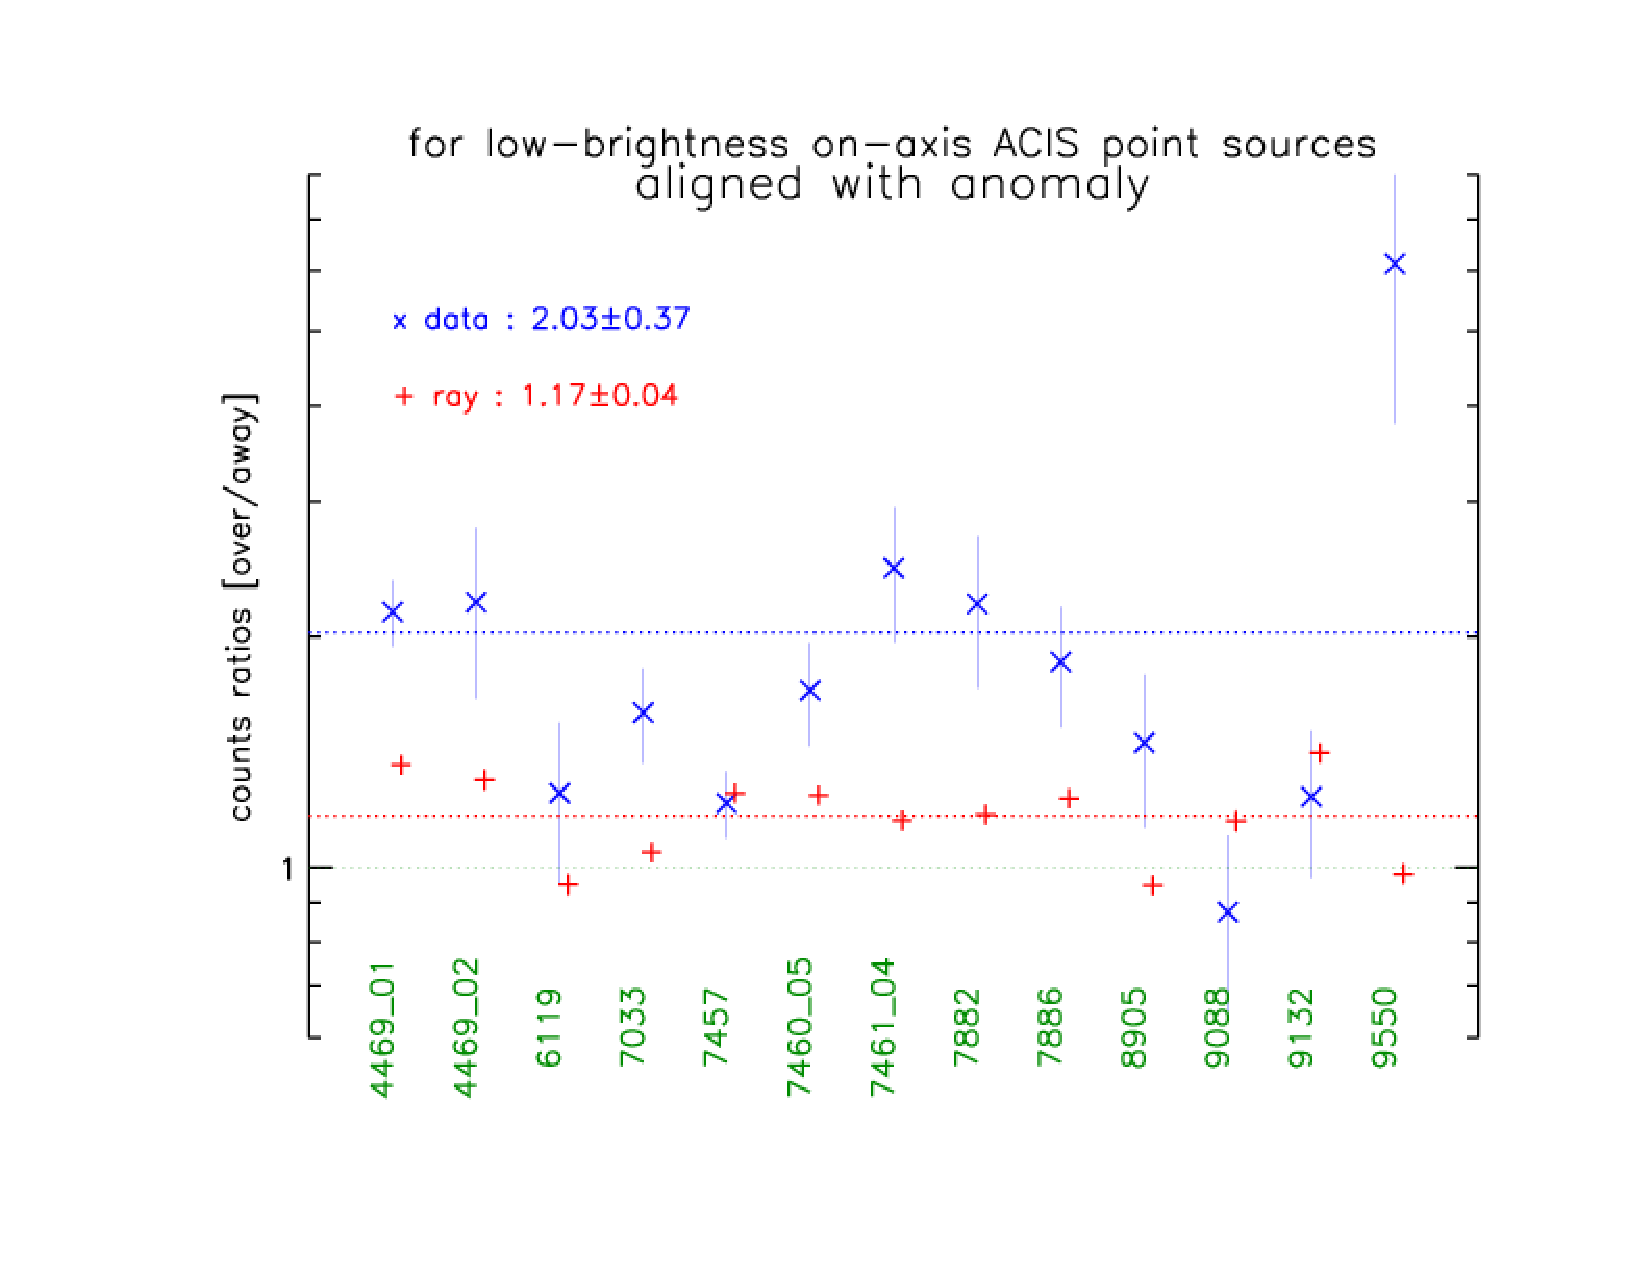 images/cf_anomaly_ratios_acis_align2.png